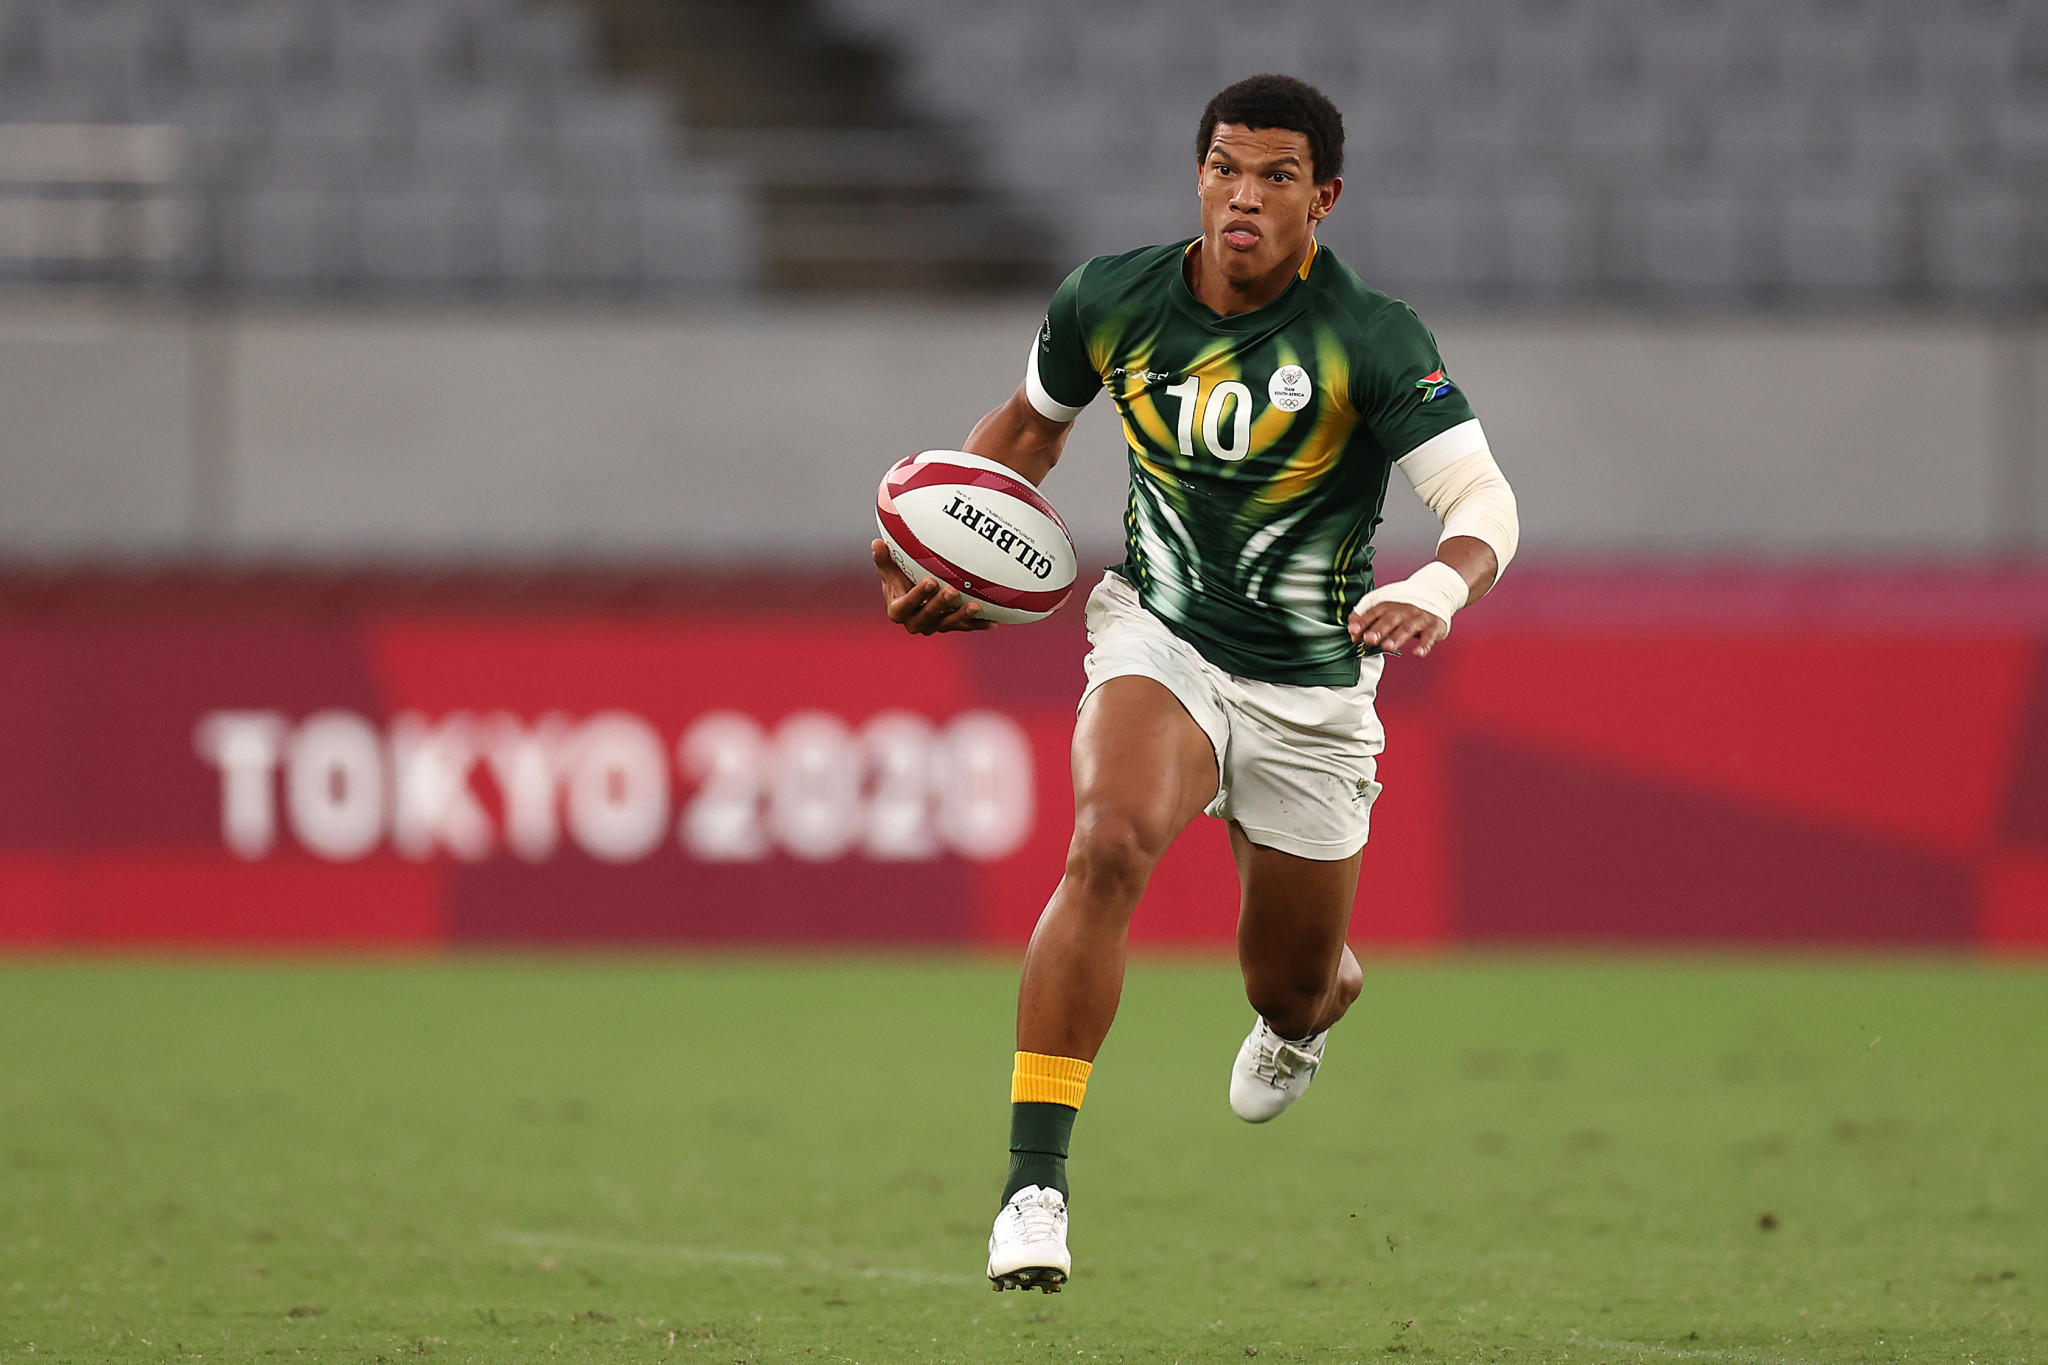 South Africa looking for fourth successive World Rugby Sevens Series victory